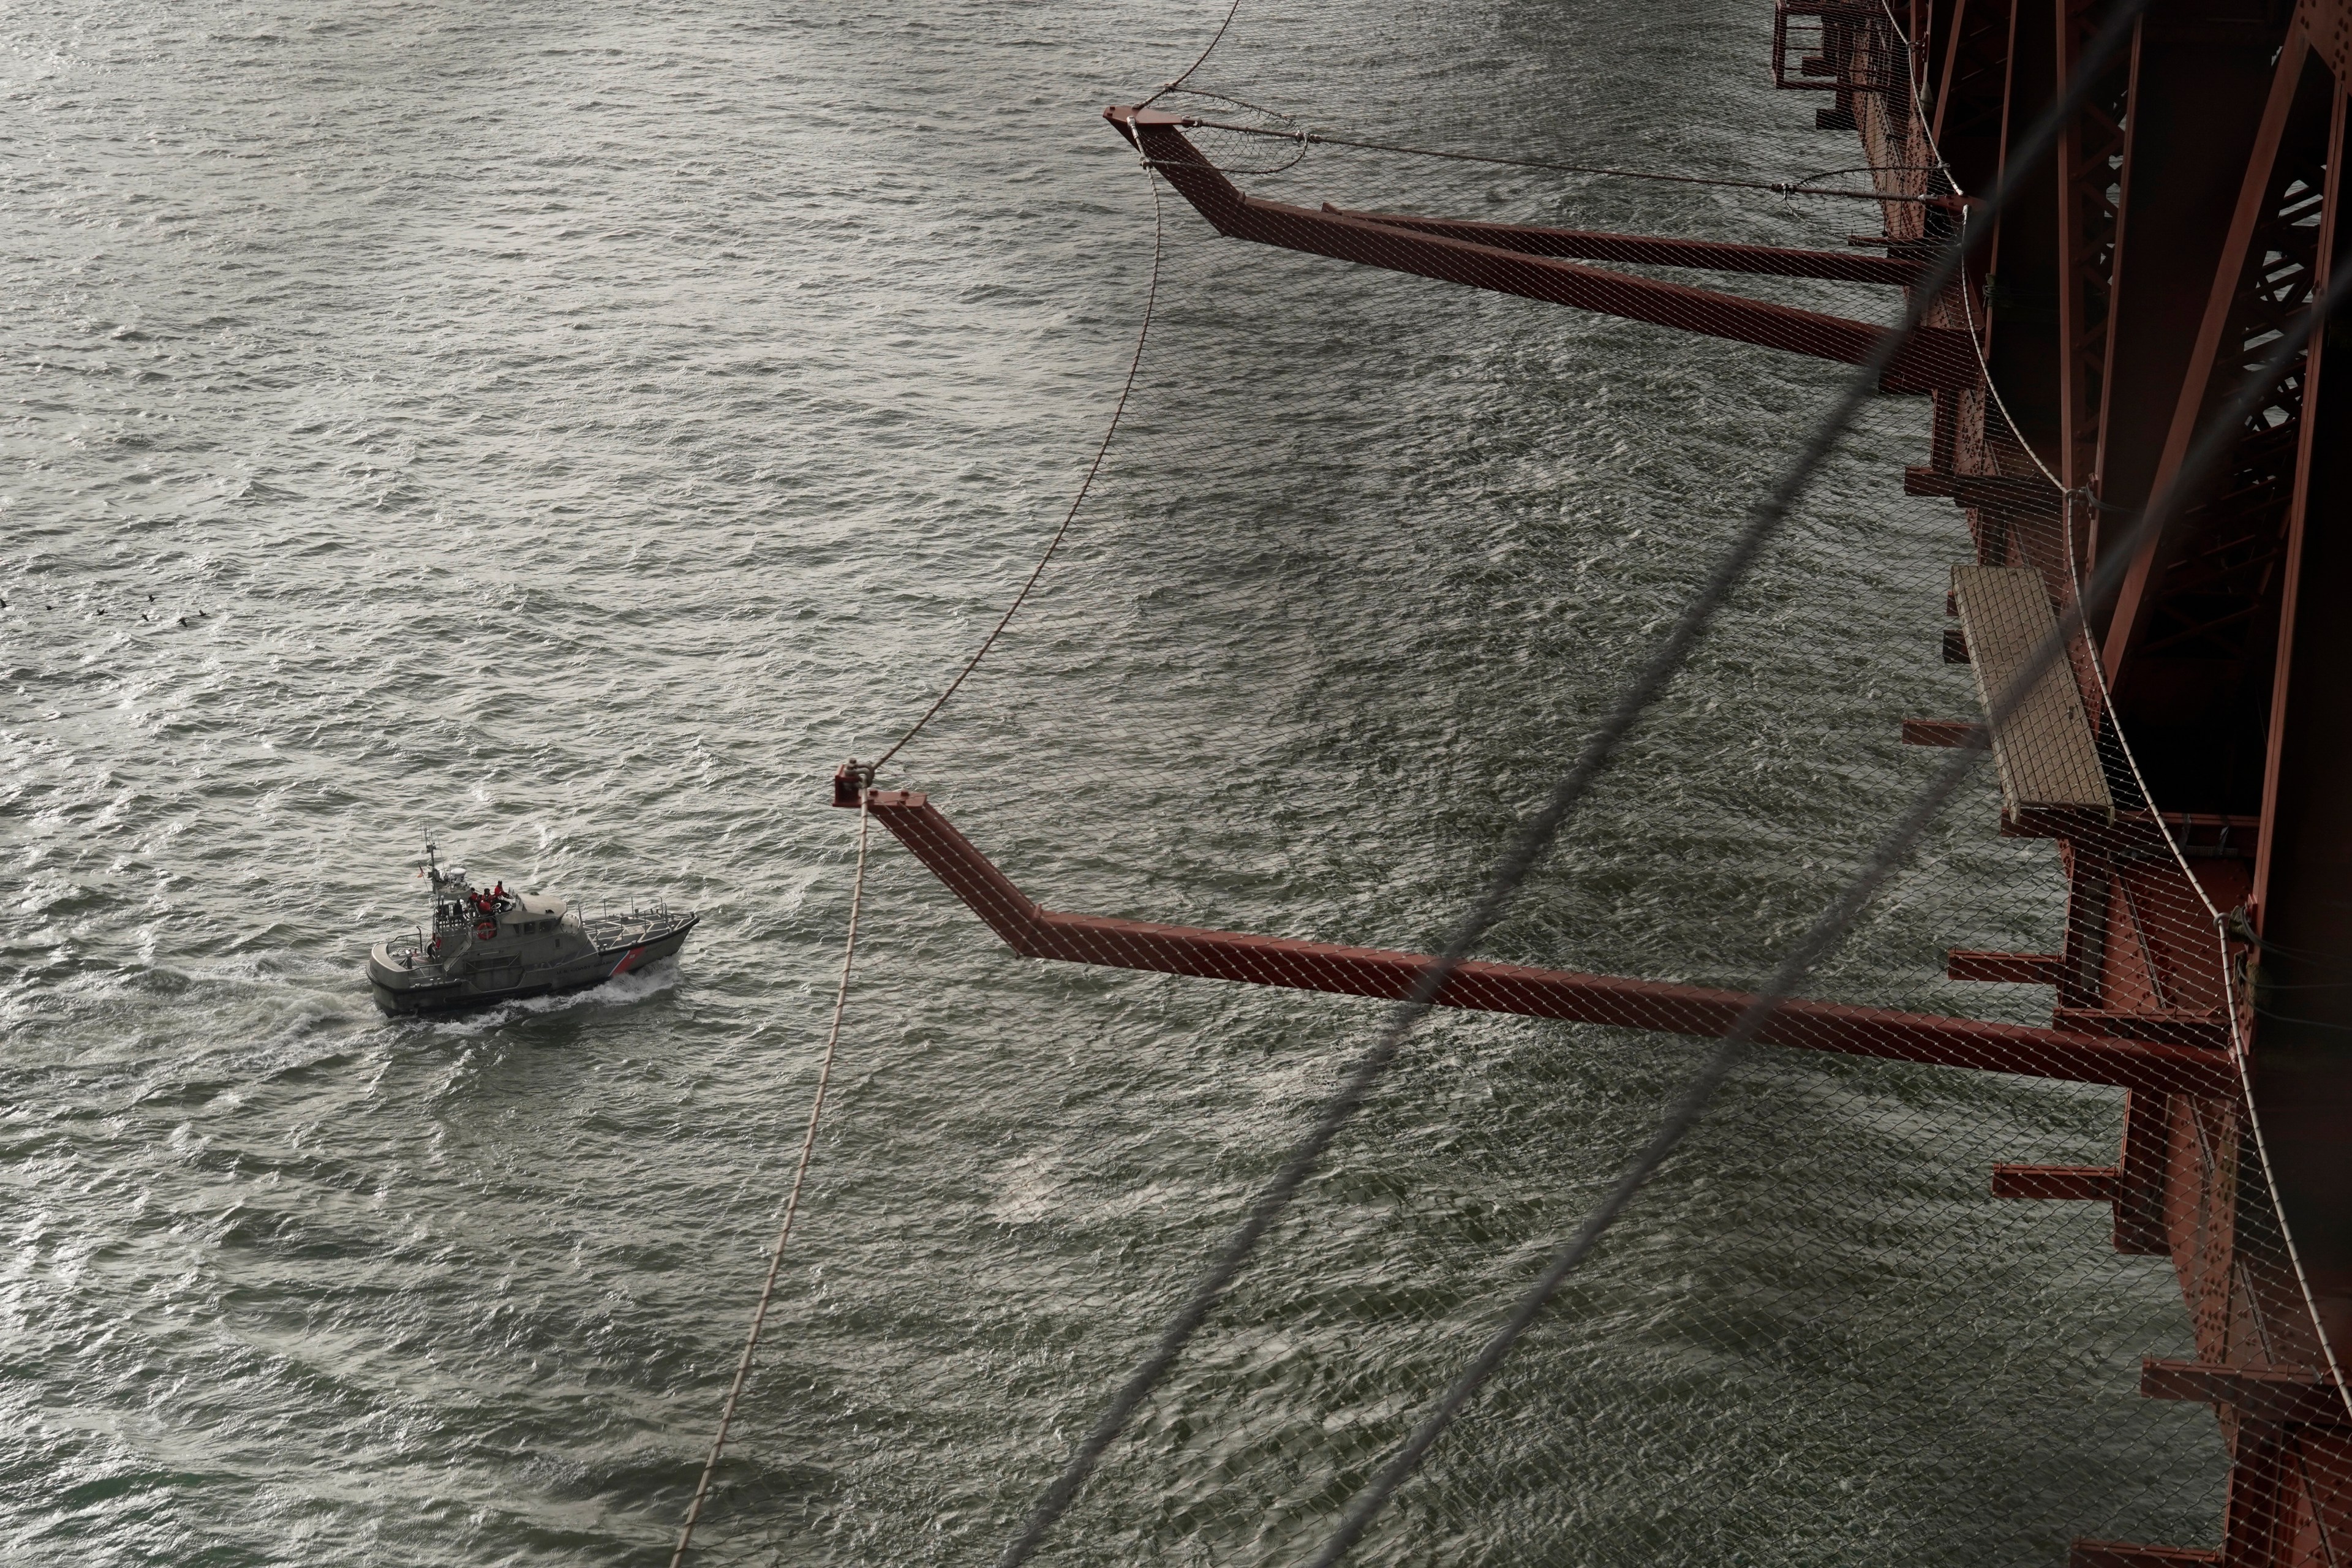 A ship passes below netting on side of red bridge